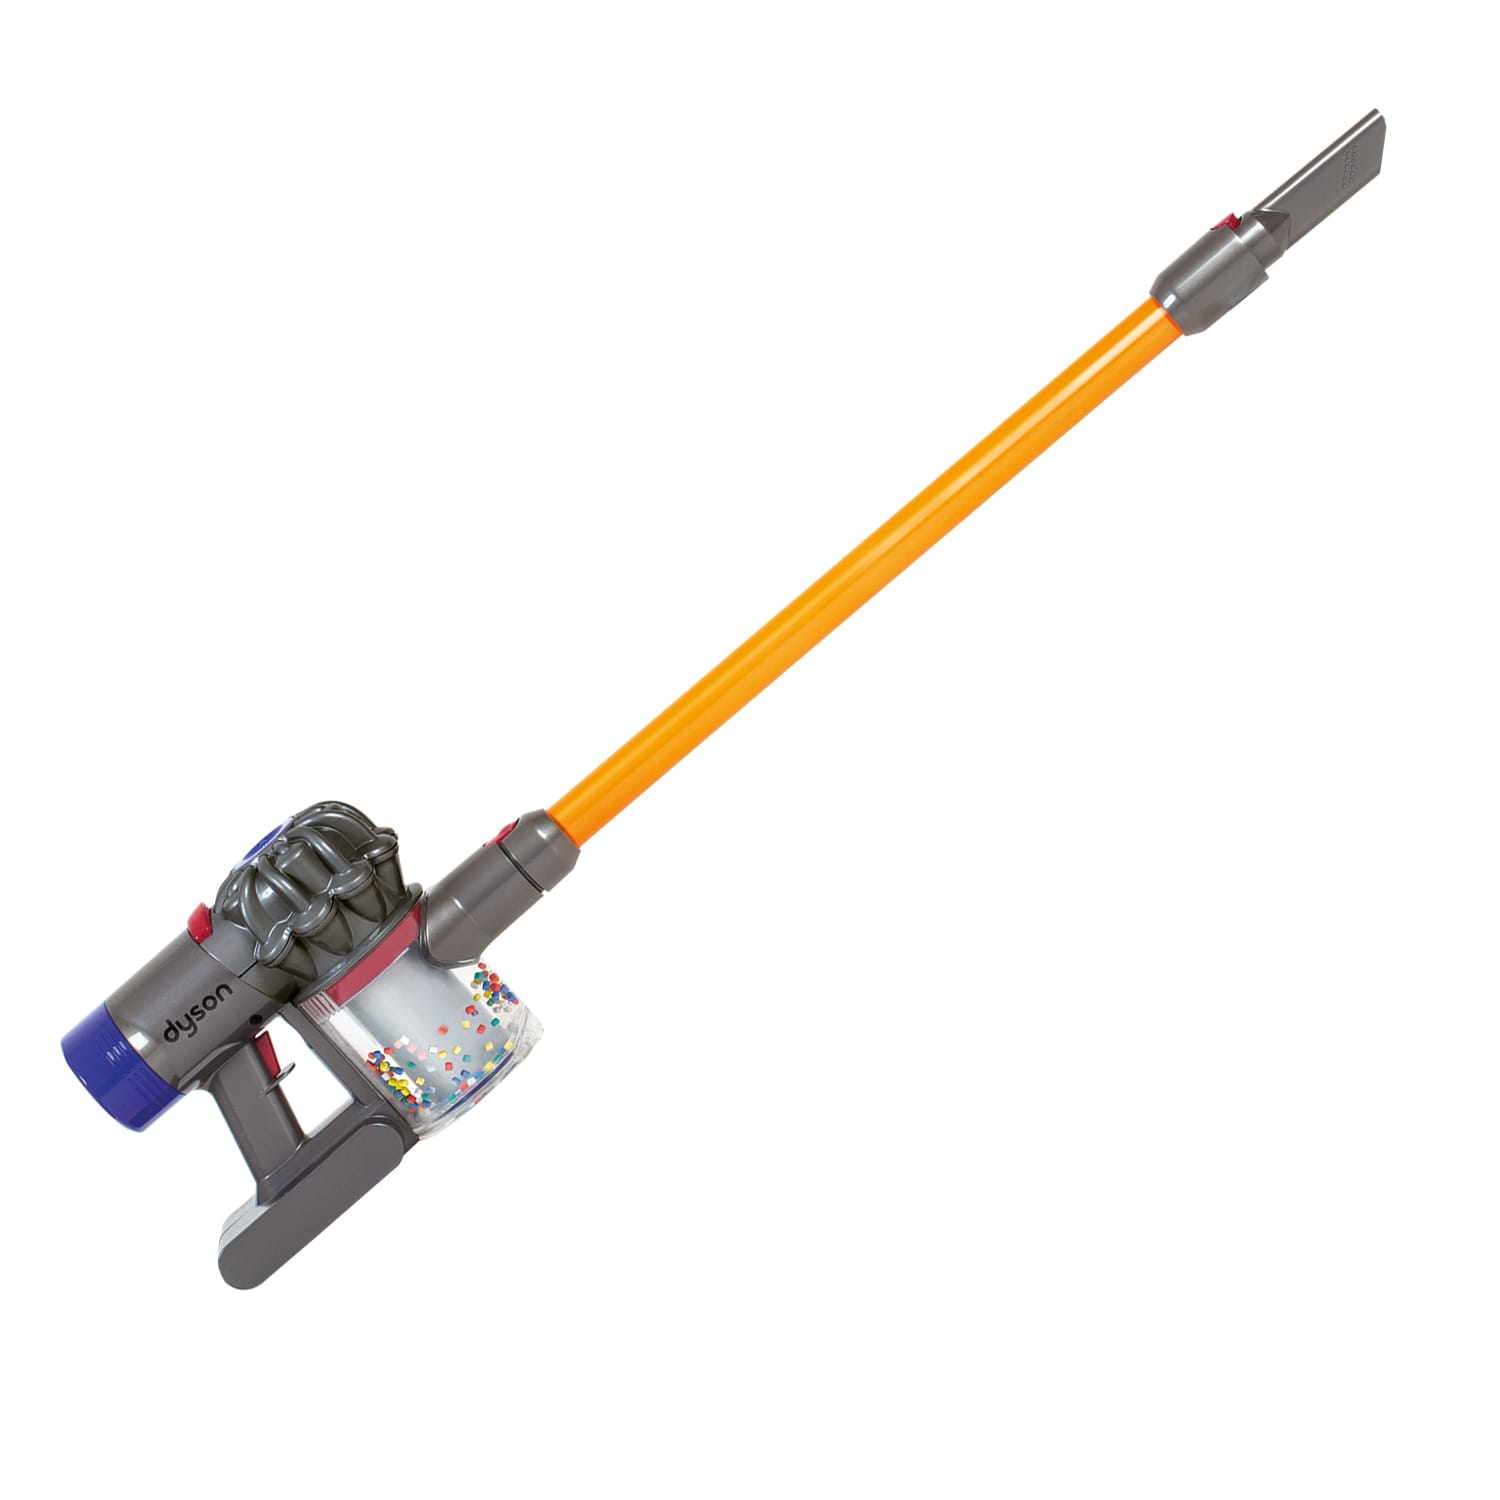 DYSON CORD-FREE VACUUM CLEANER KIDS TOY CASDON 